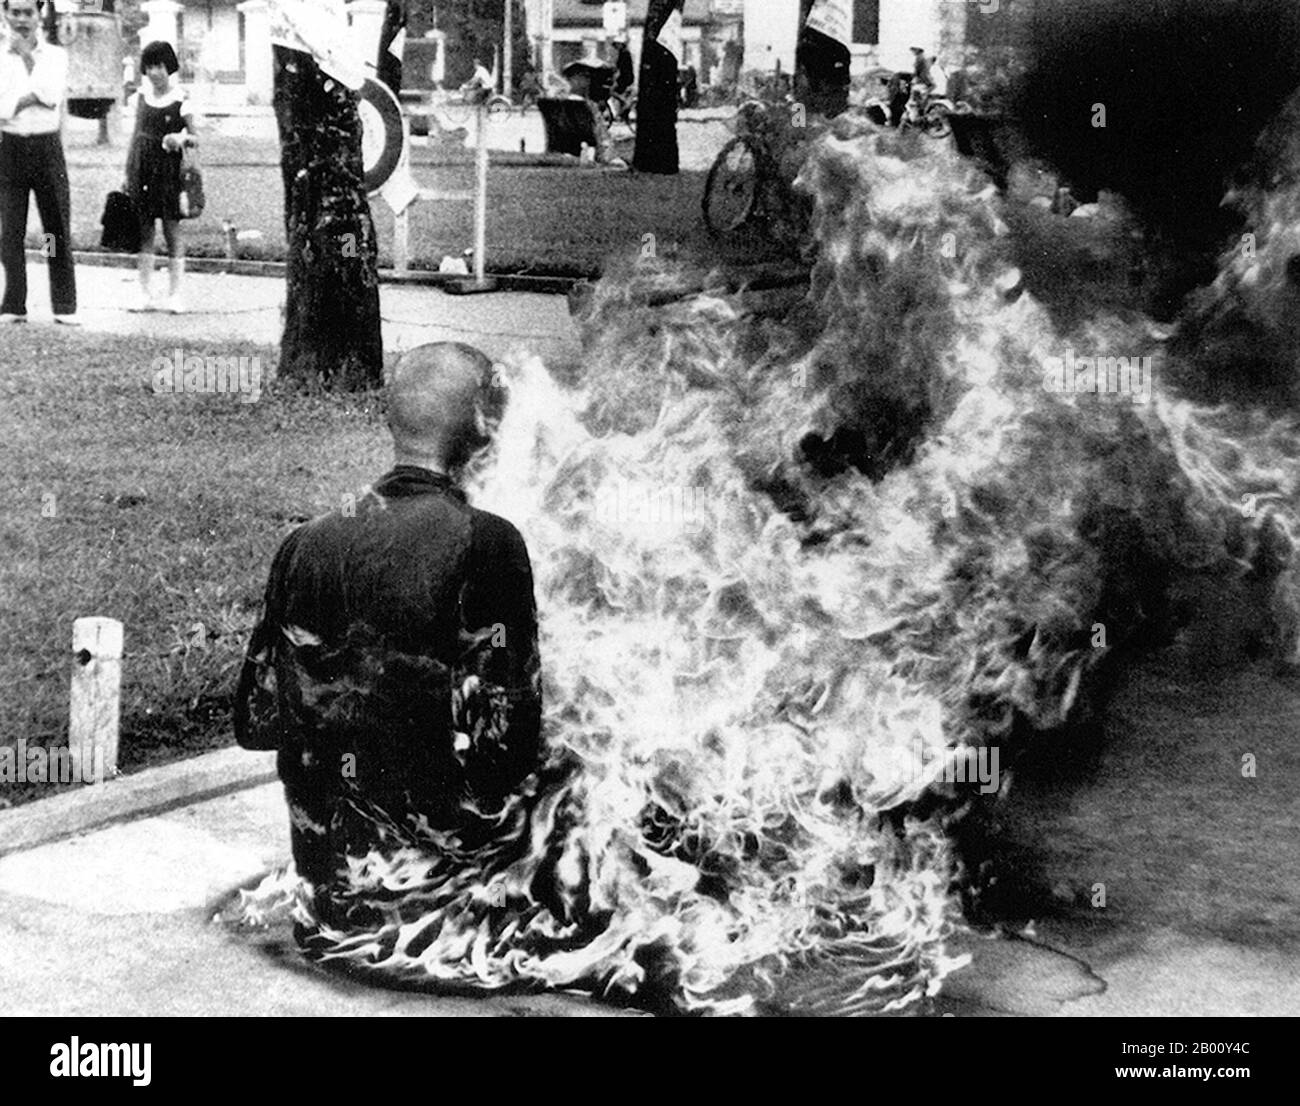 Vietnam: A Buddhist monk burns himself to death, Saigon, 1963.  Buddhist monks, especially from Hue in Central Vietnam, but also from other locations including Saigon, practiced self-immolation to protest the division of Vietnam into north and south, the authoritarian nature of consecutive South Vietnamese regimes, and South Vietnamese involvement with the United States of America. Stock Photo